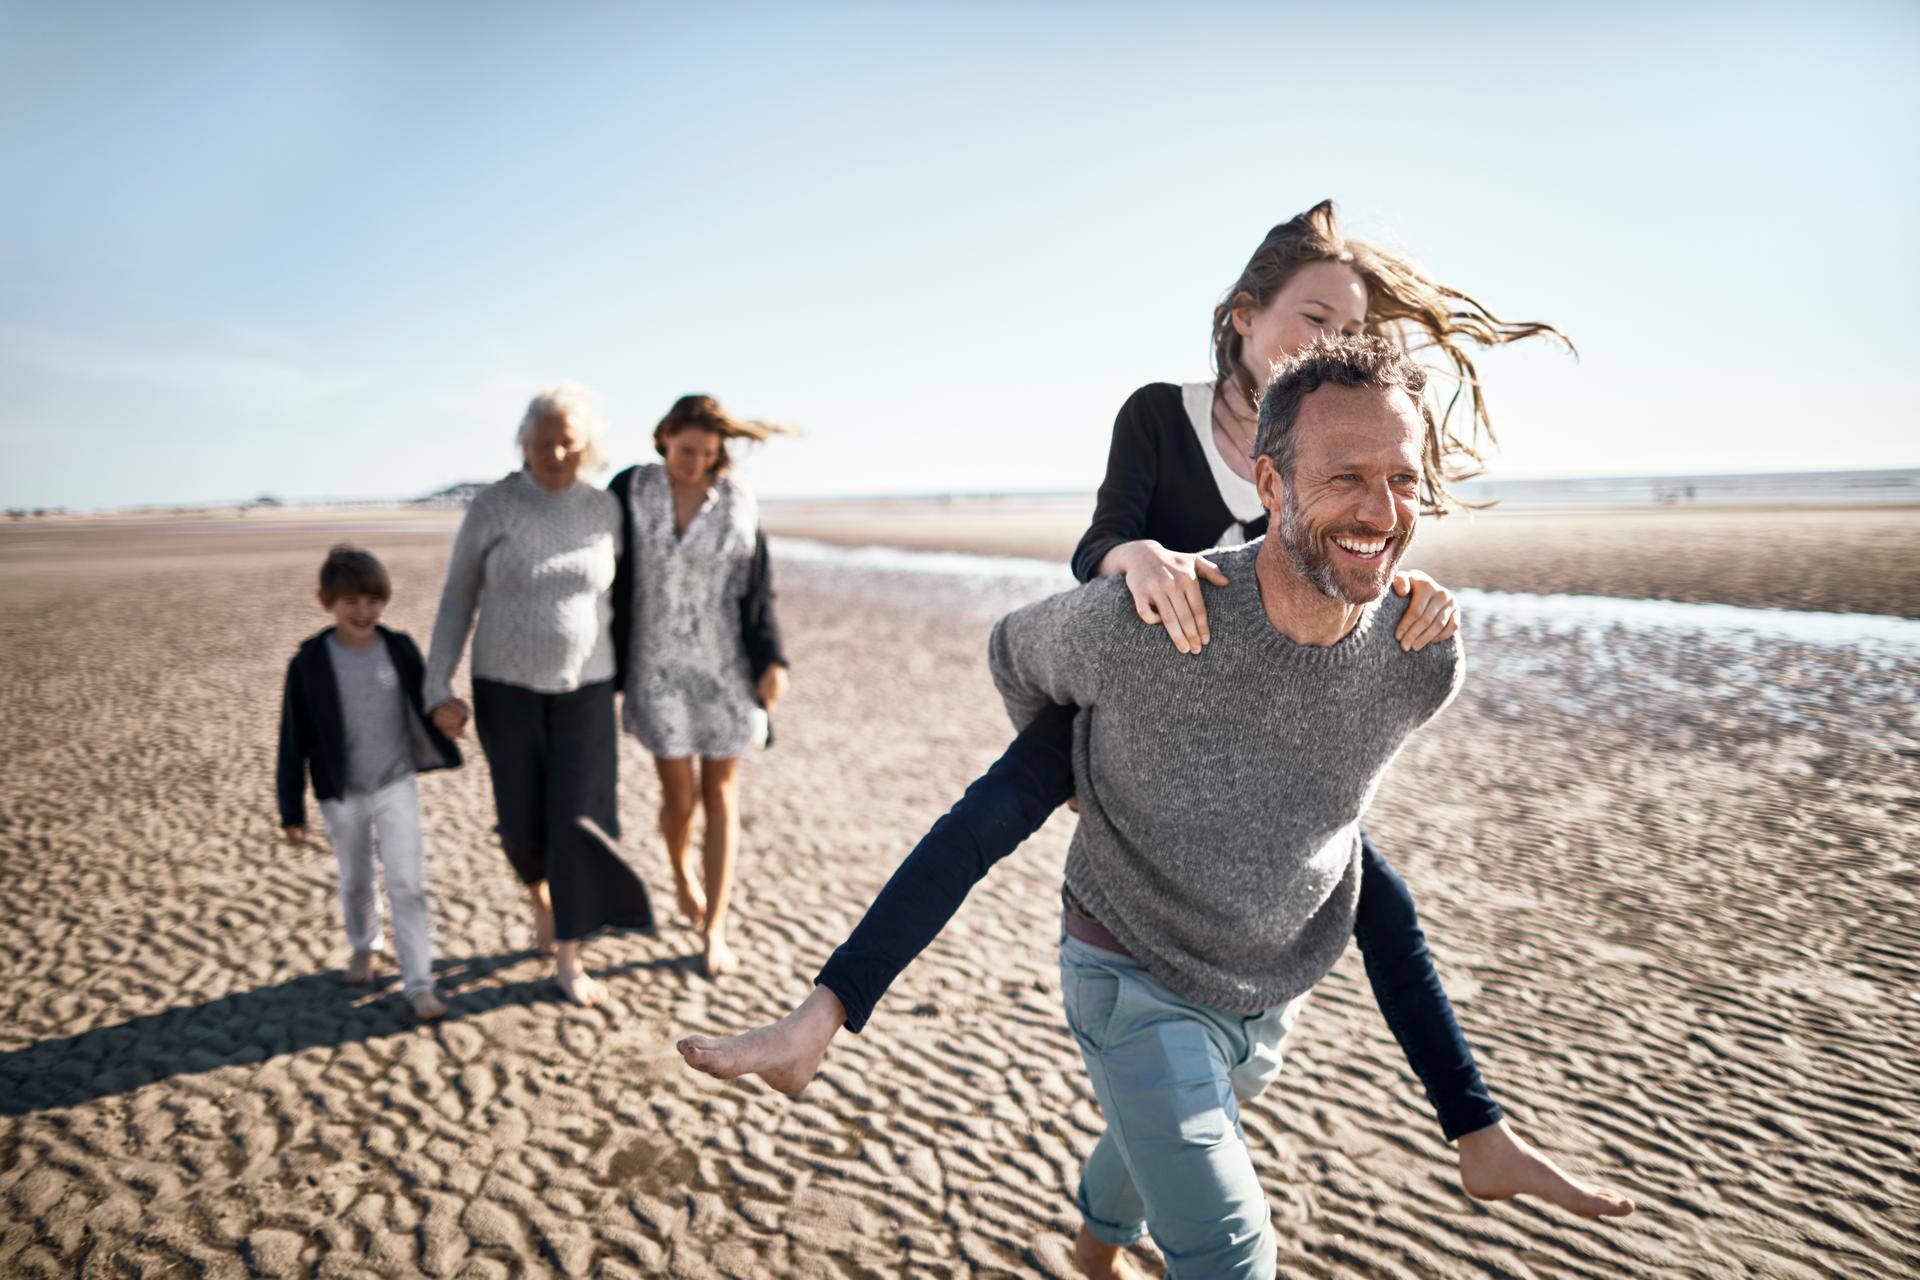 Father plays with daughter and carries her on his back. The family can be seen in the background. The image symbolizes Vontobel's life insurance service.